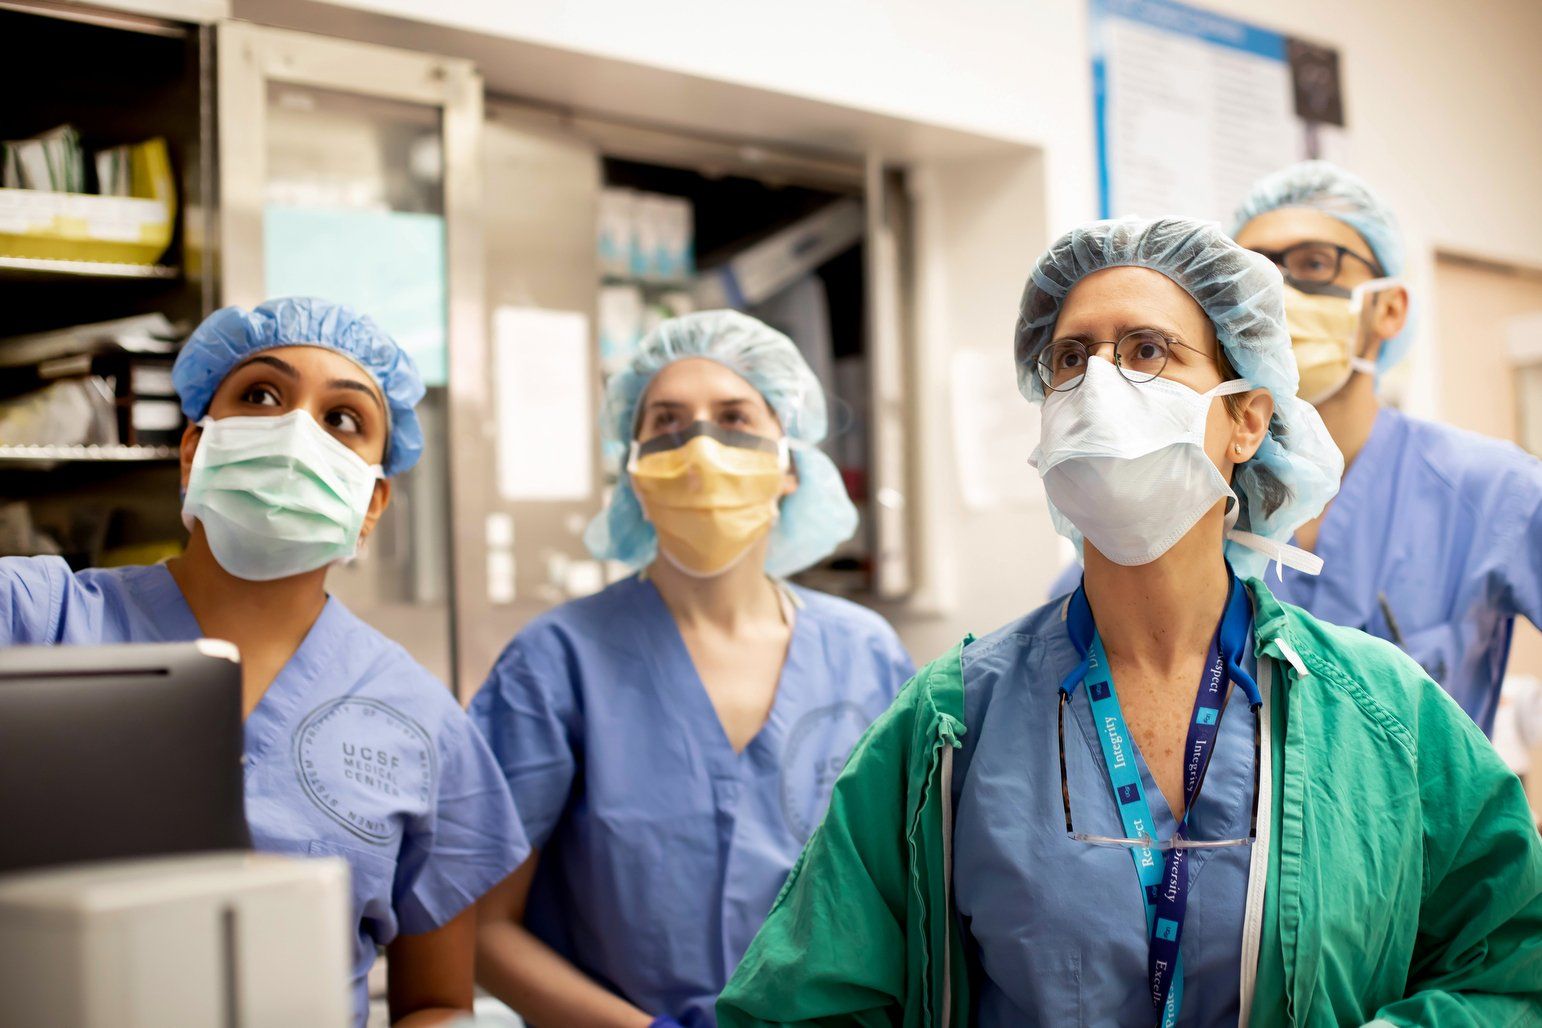 Surgeon and medical students in surgical scrubs